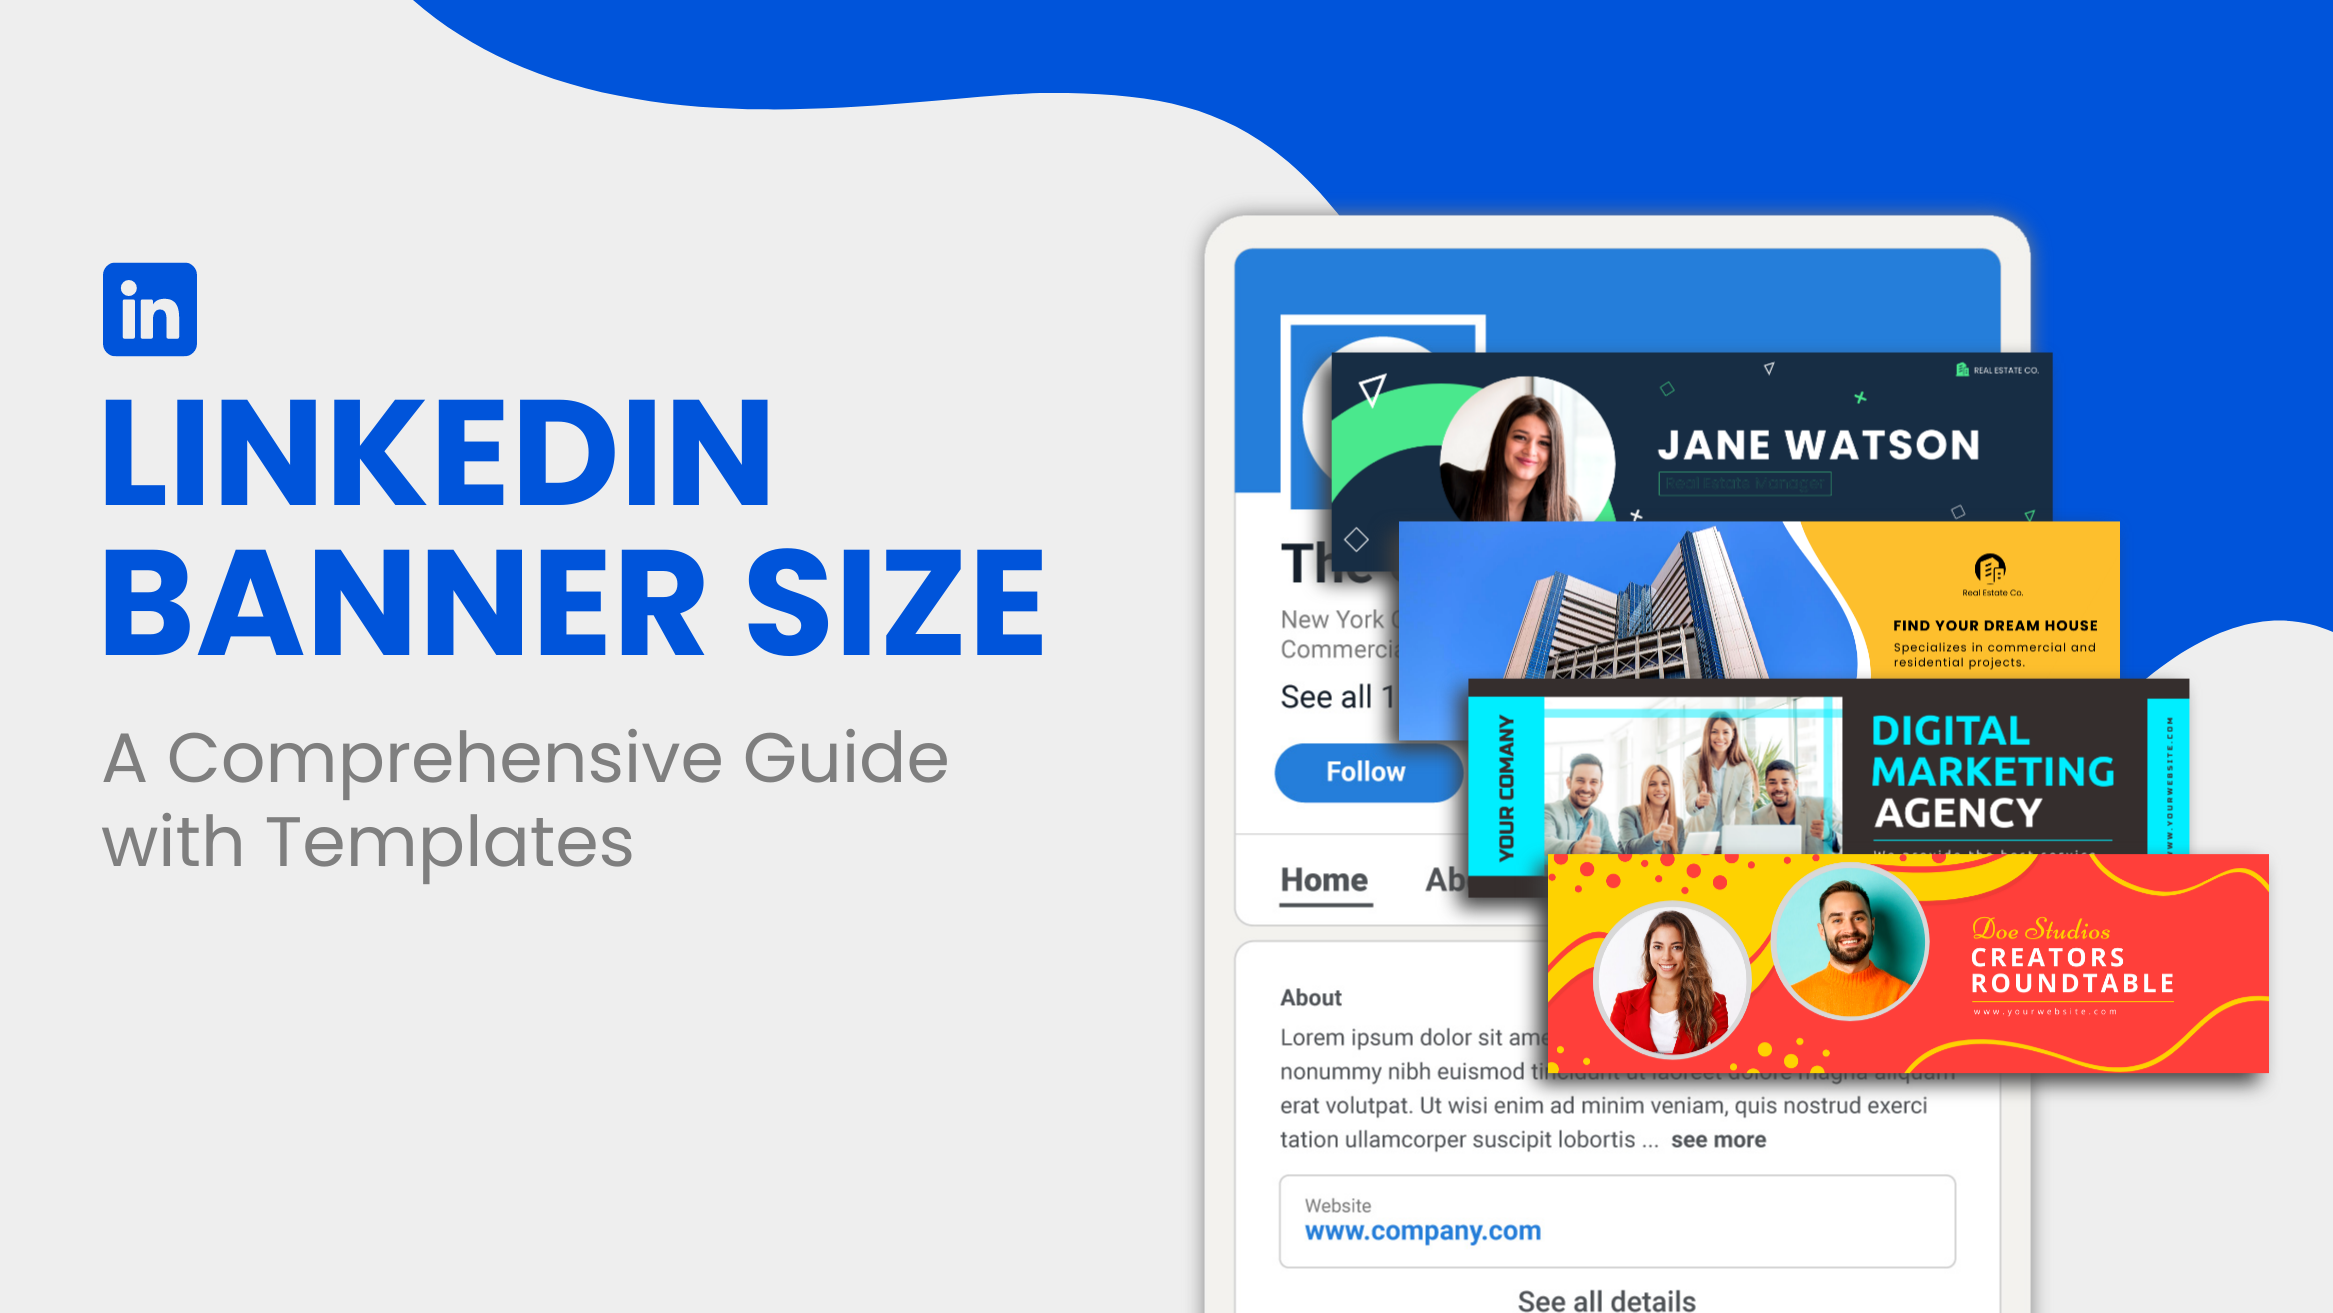 LinkedIn Banner Size A Comprehensive Guide with Templates- blog banner